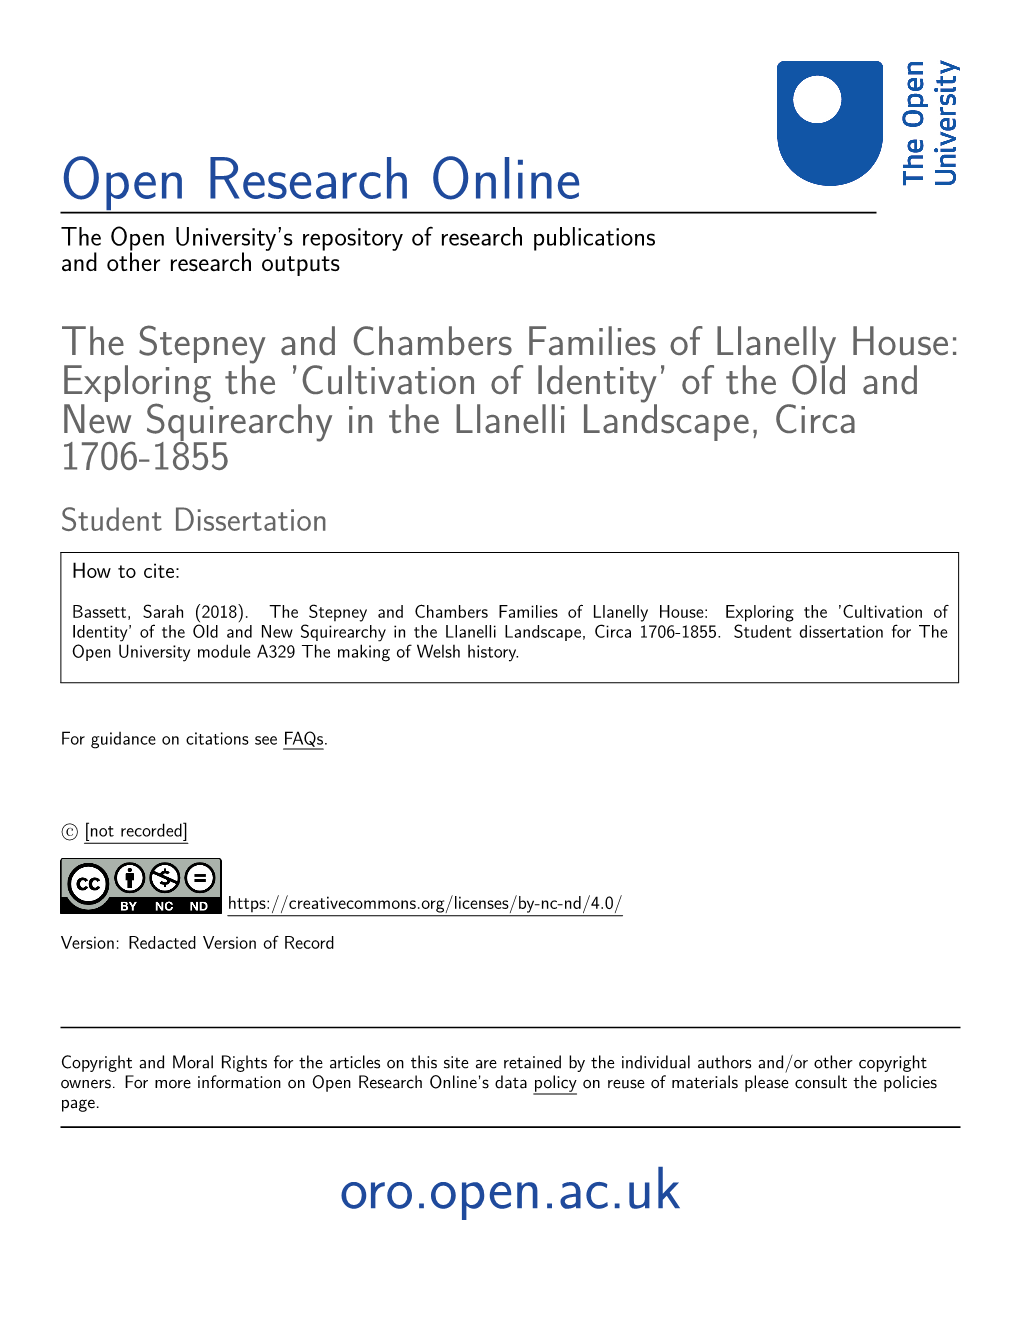 The Stepney and Chambers Families of Llanelly House